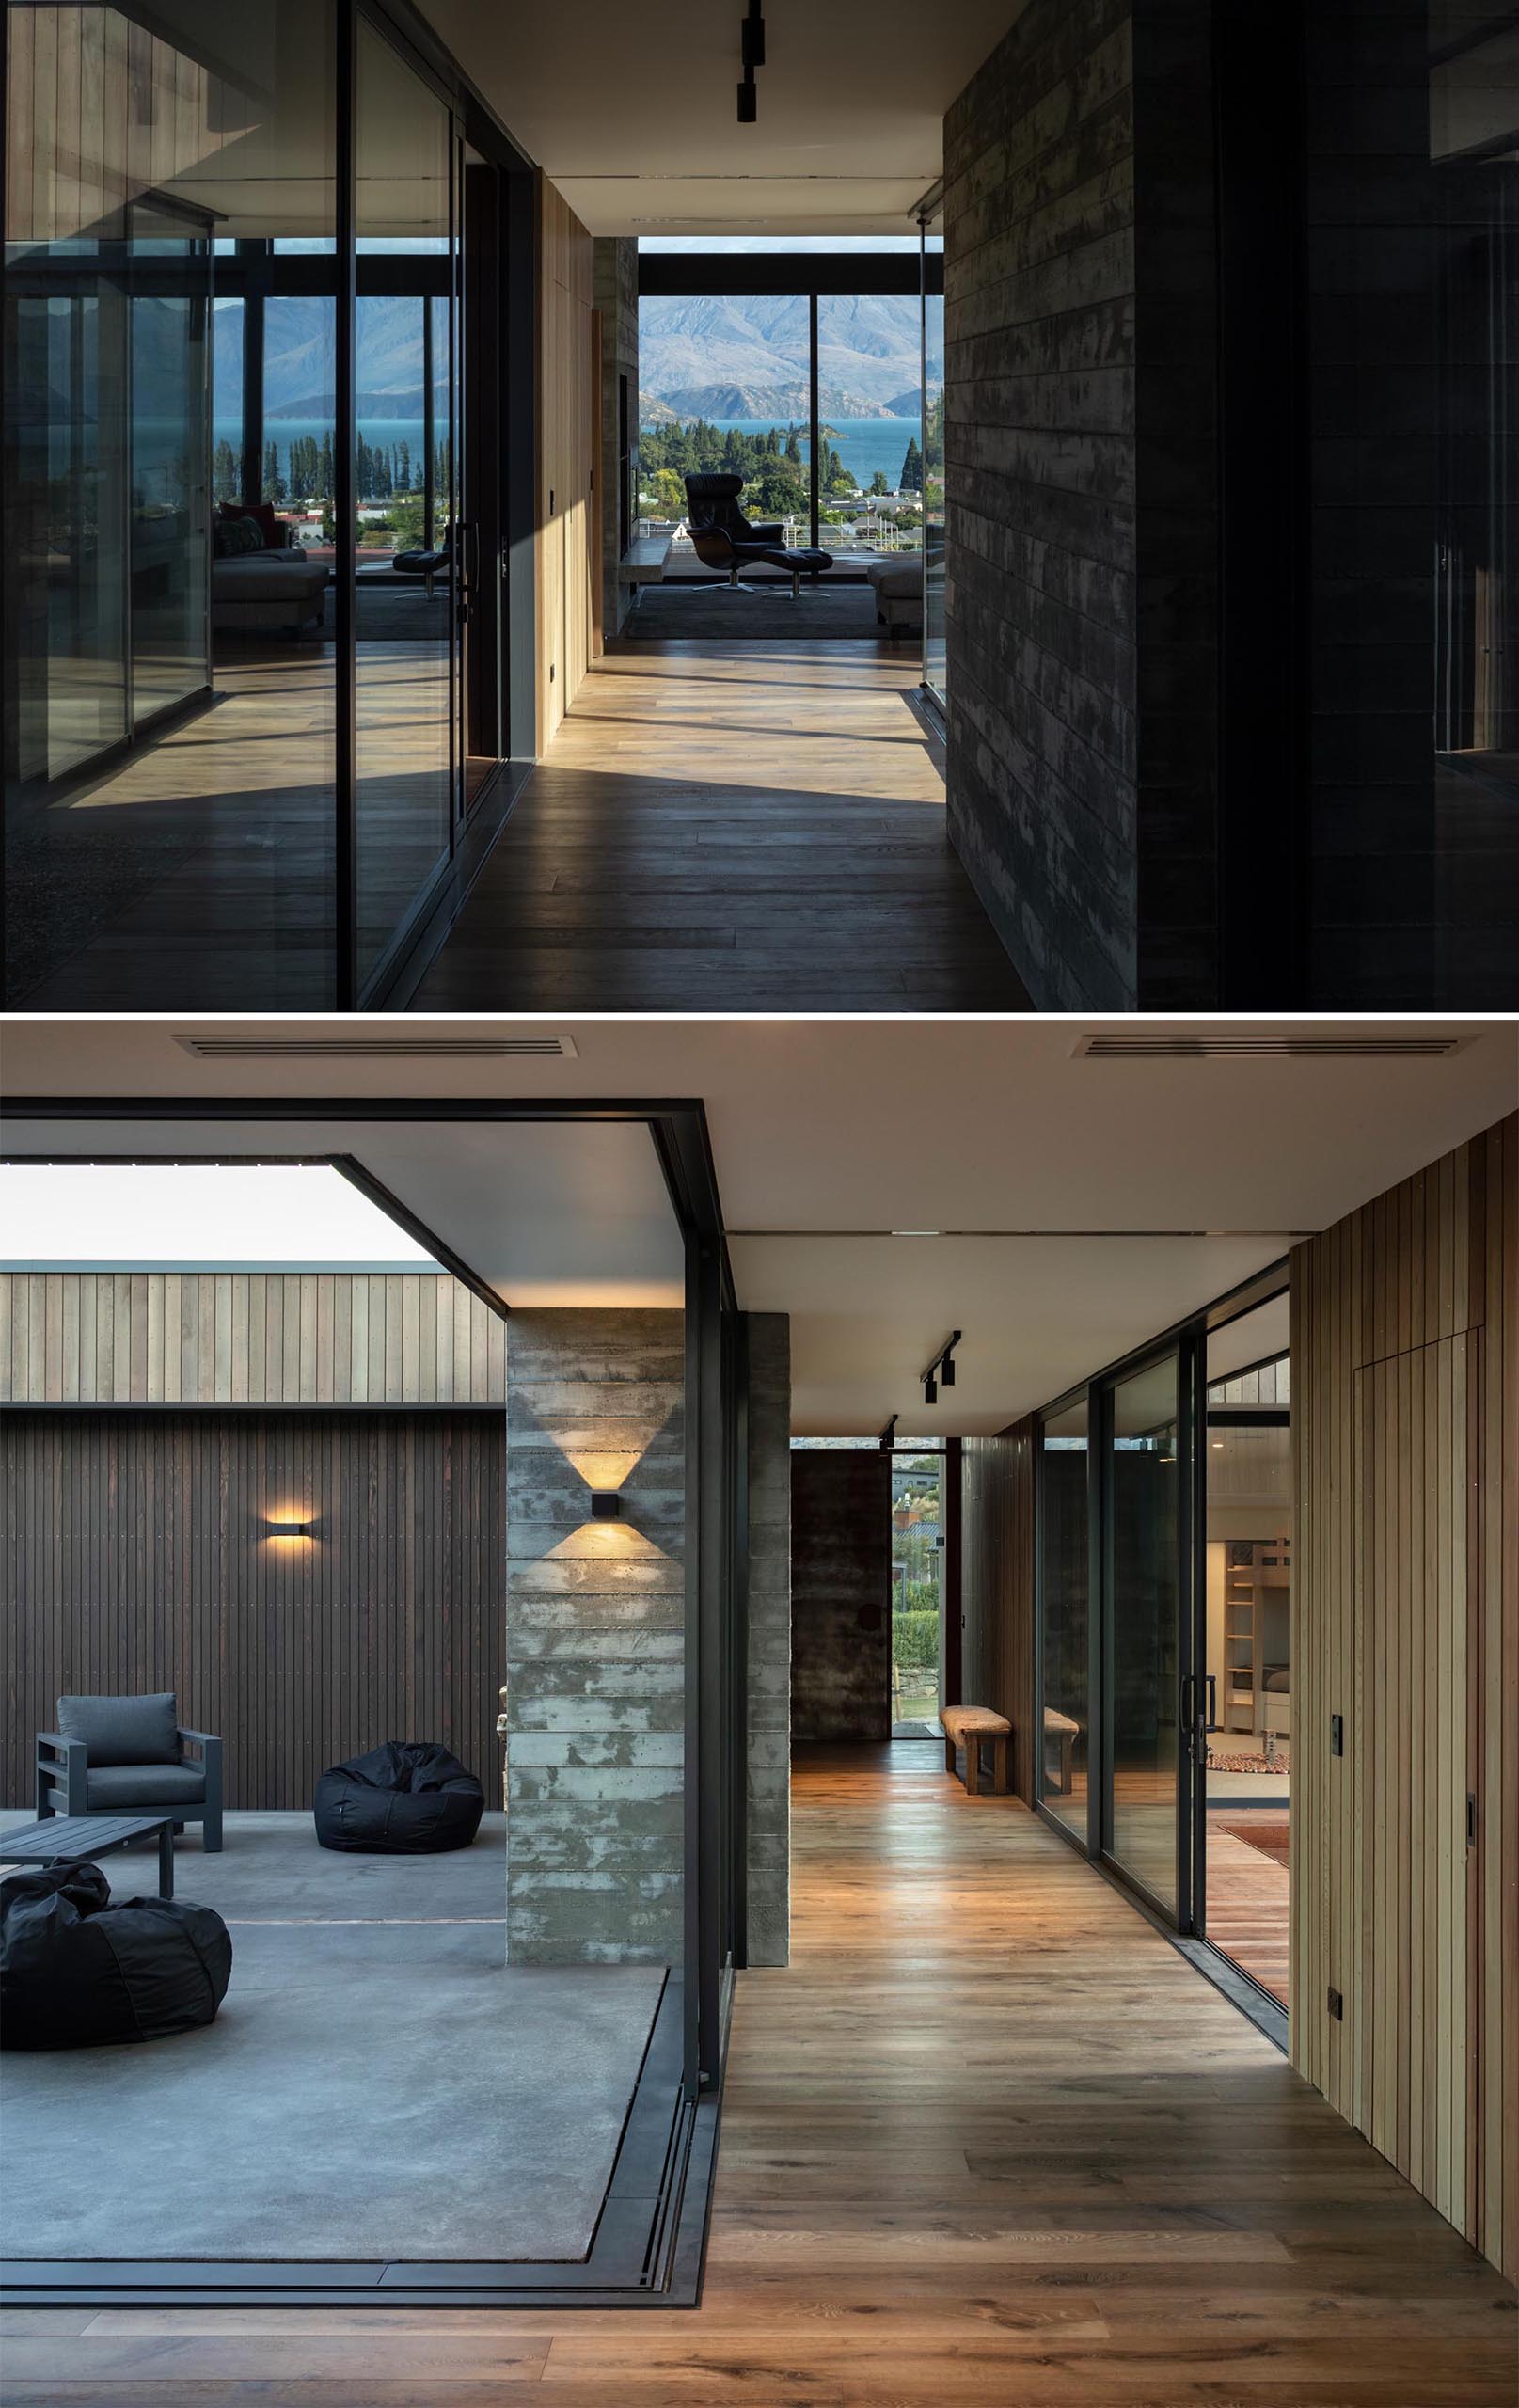 Large sliding glass doors open this home interior to the outdoors and a courtyard.